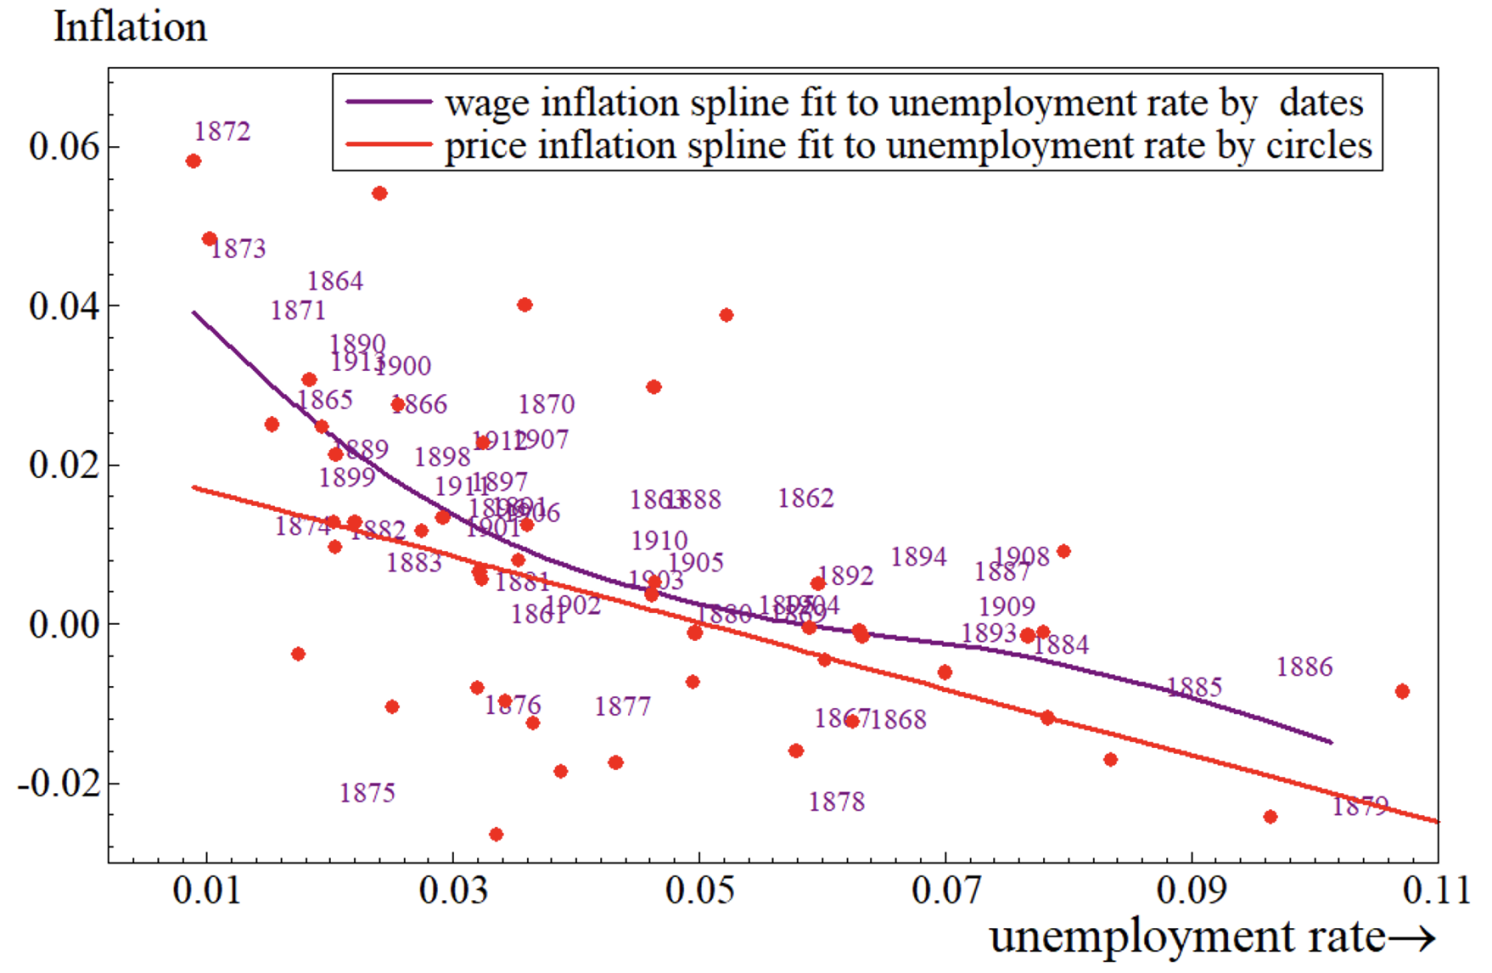 Figure 1 Comparing Phillips curve in price inflation with wage inflation